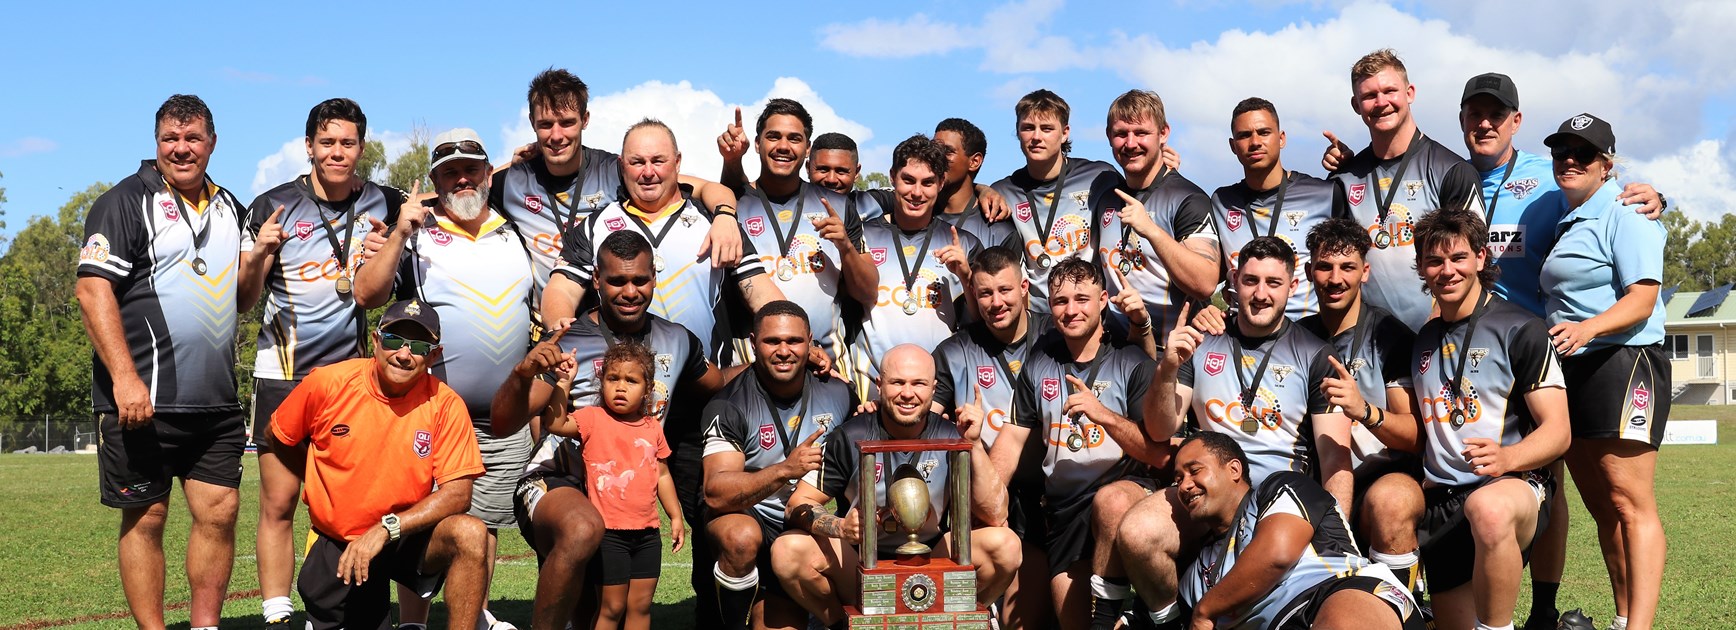 XXXX League Championship semi: Everything you need to know